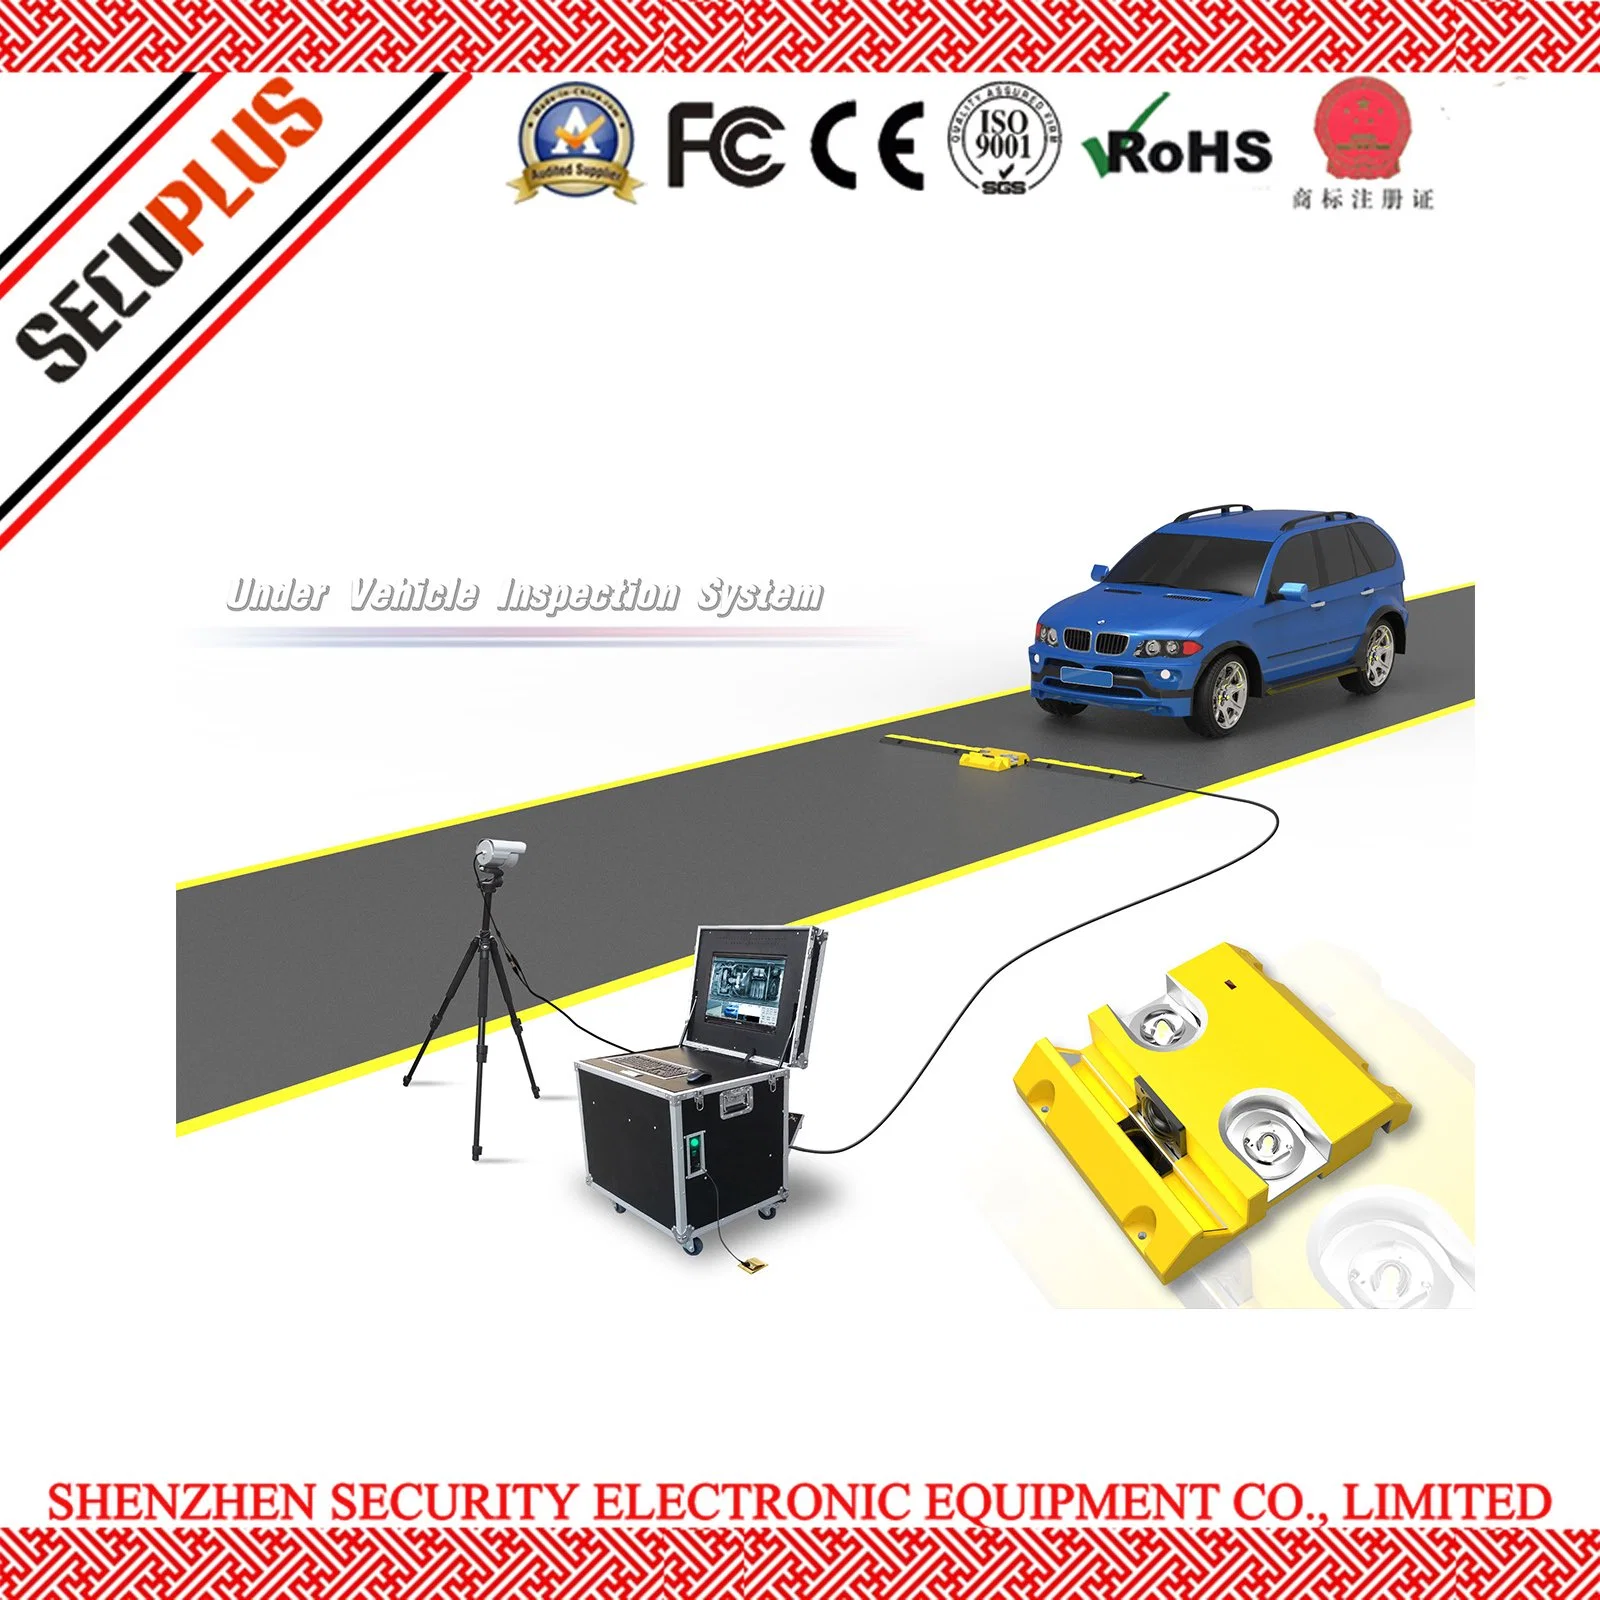 Under Vehicle Inspection Searching Weapon and Detection System